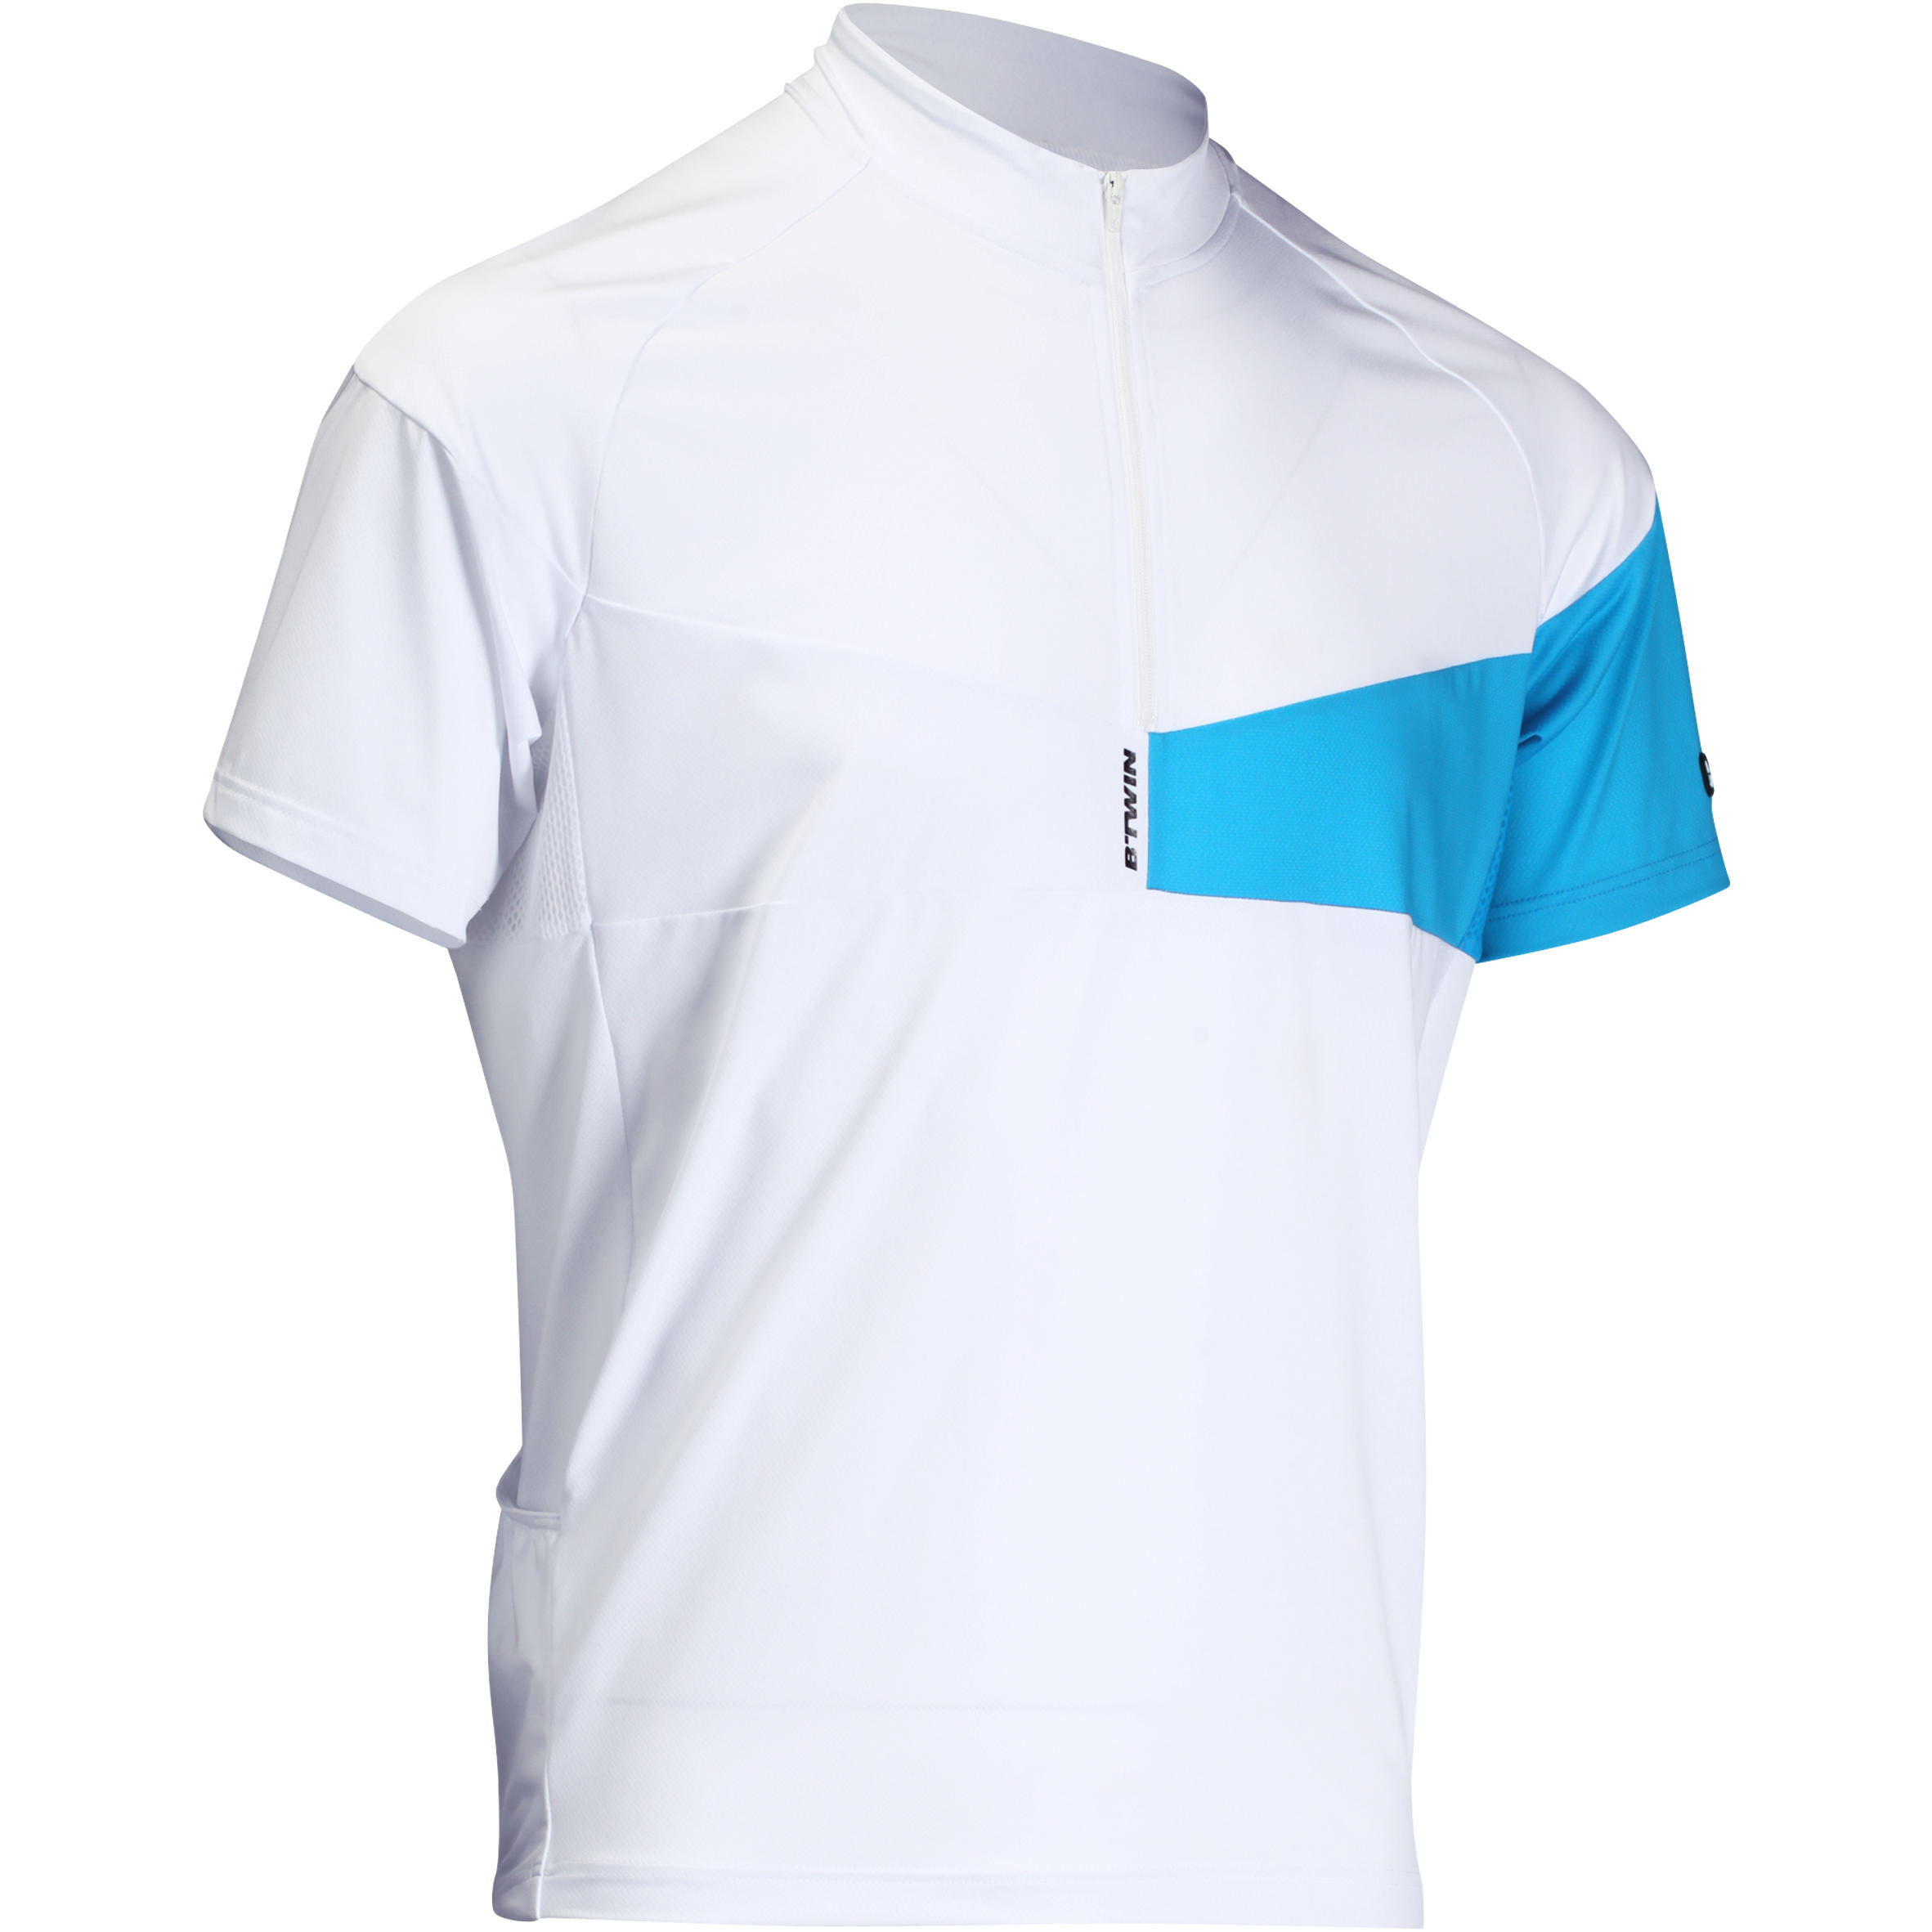 BTWIN 500 Short Sleeve Cycling Jersey - White/Blue